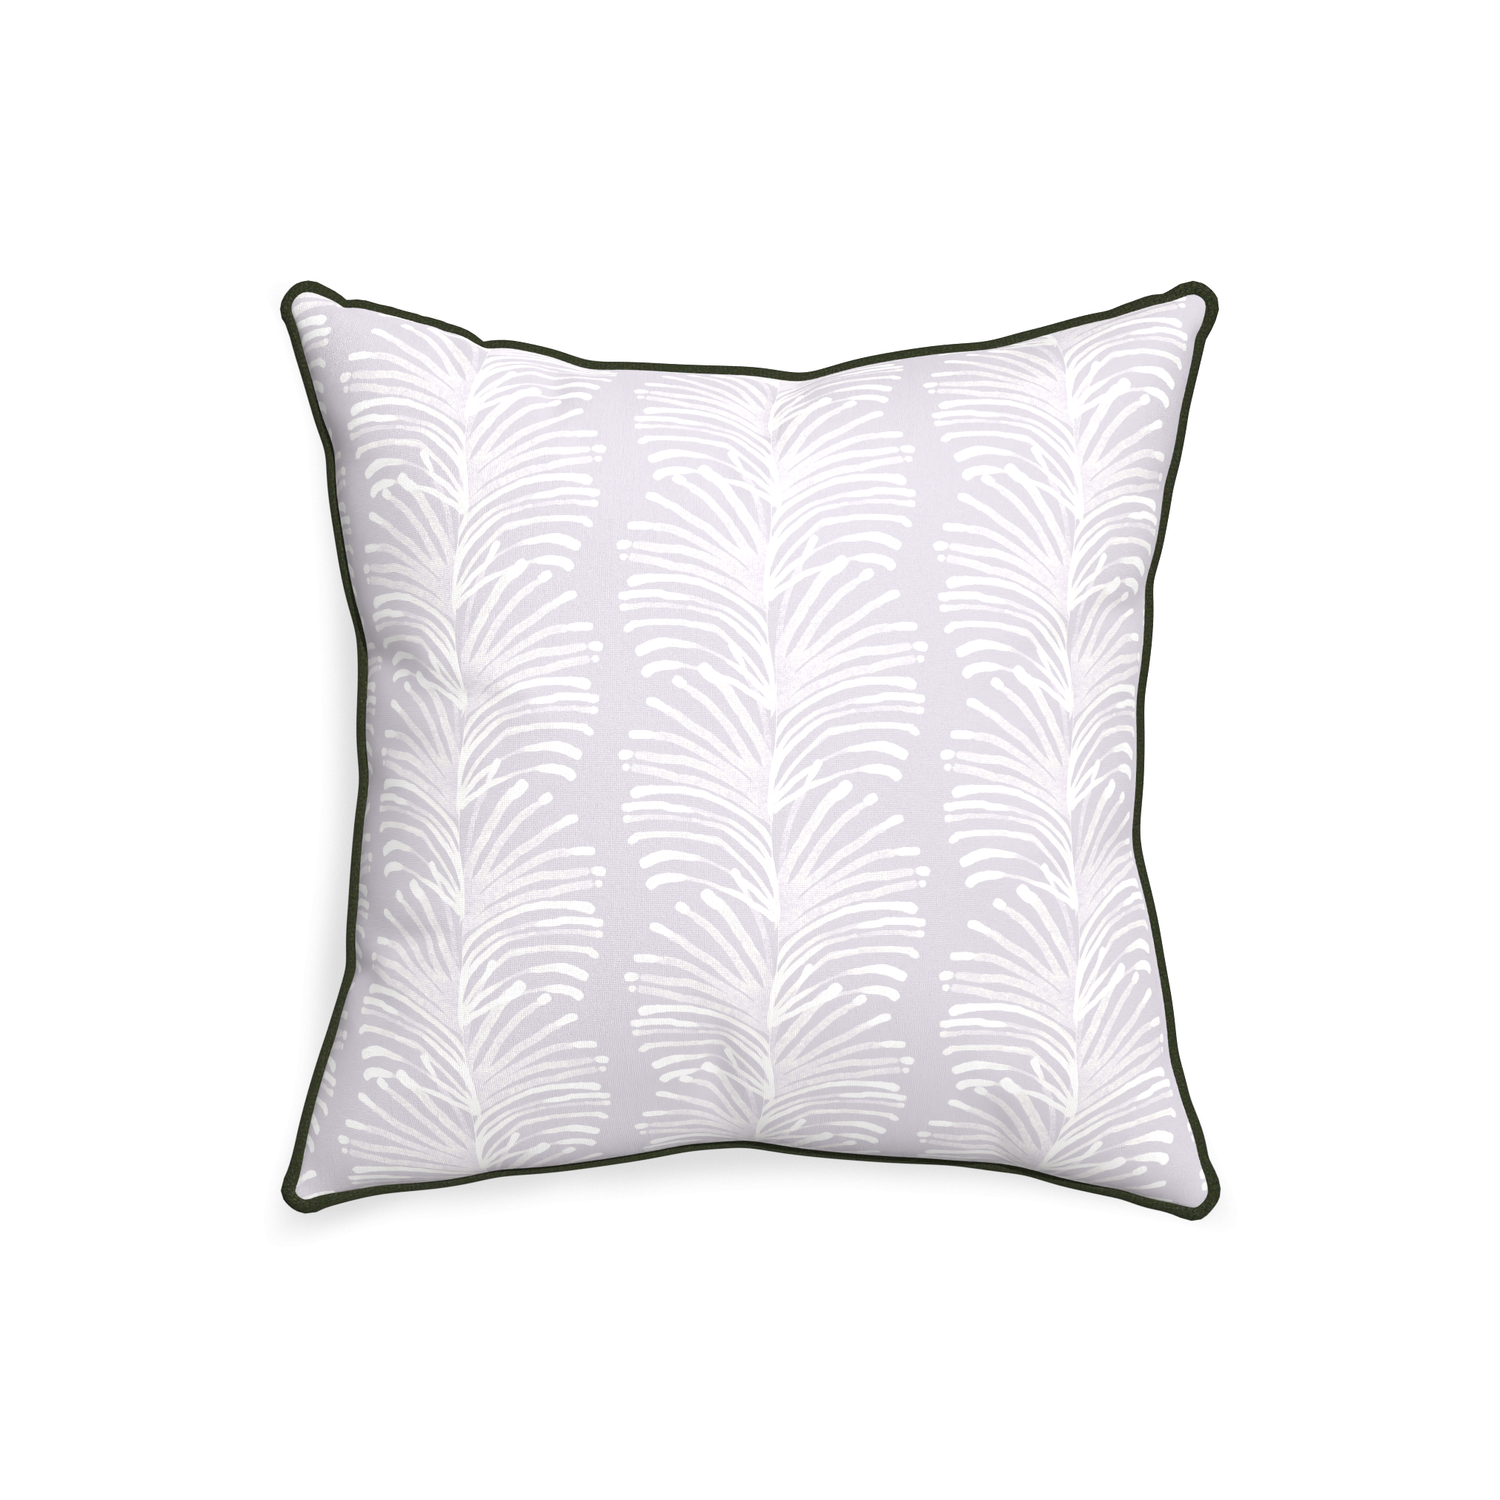 20-square emma lavender custom lavender botanical stripepillow with f piping on white background